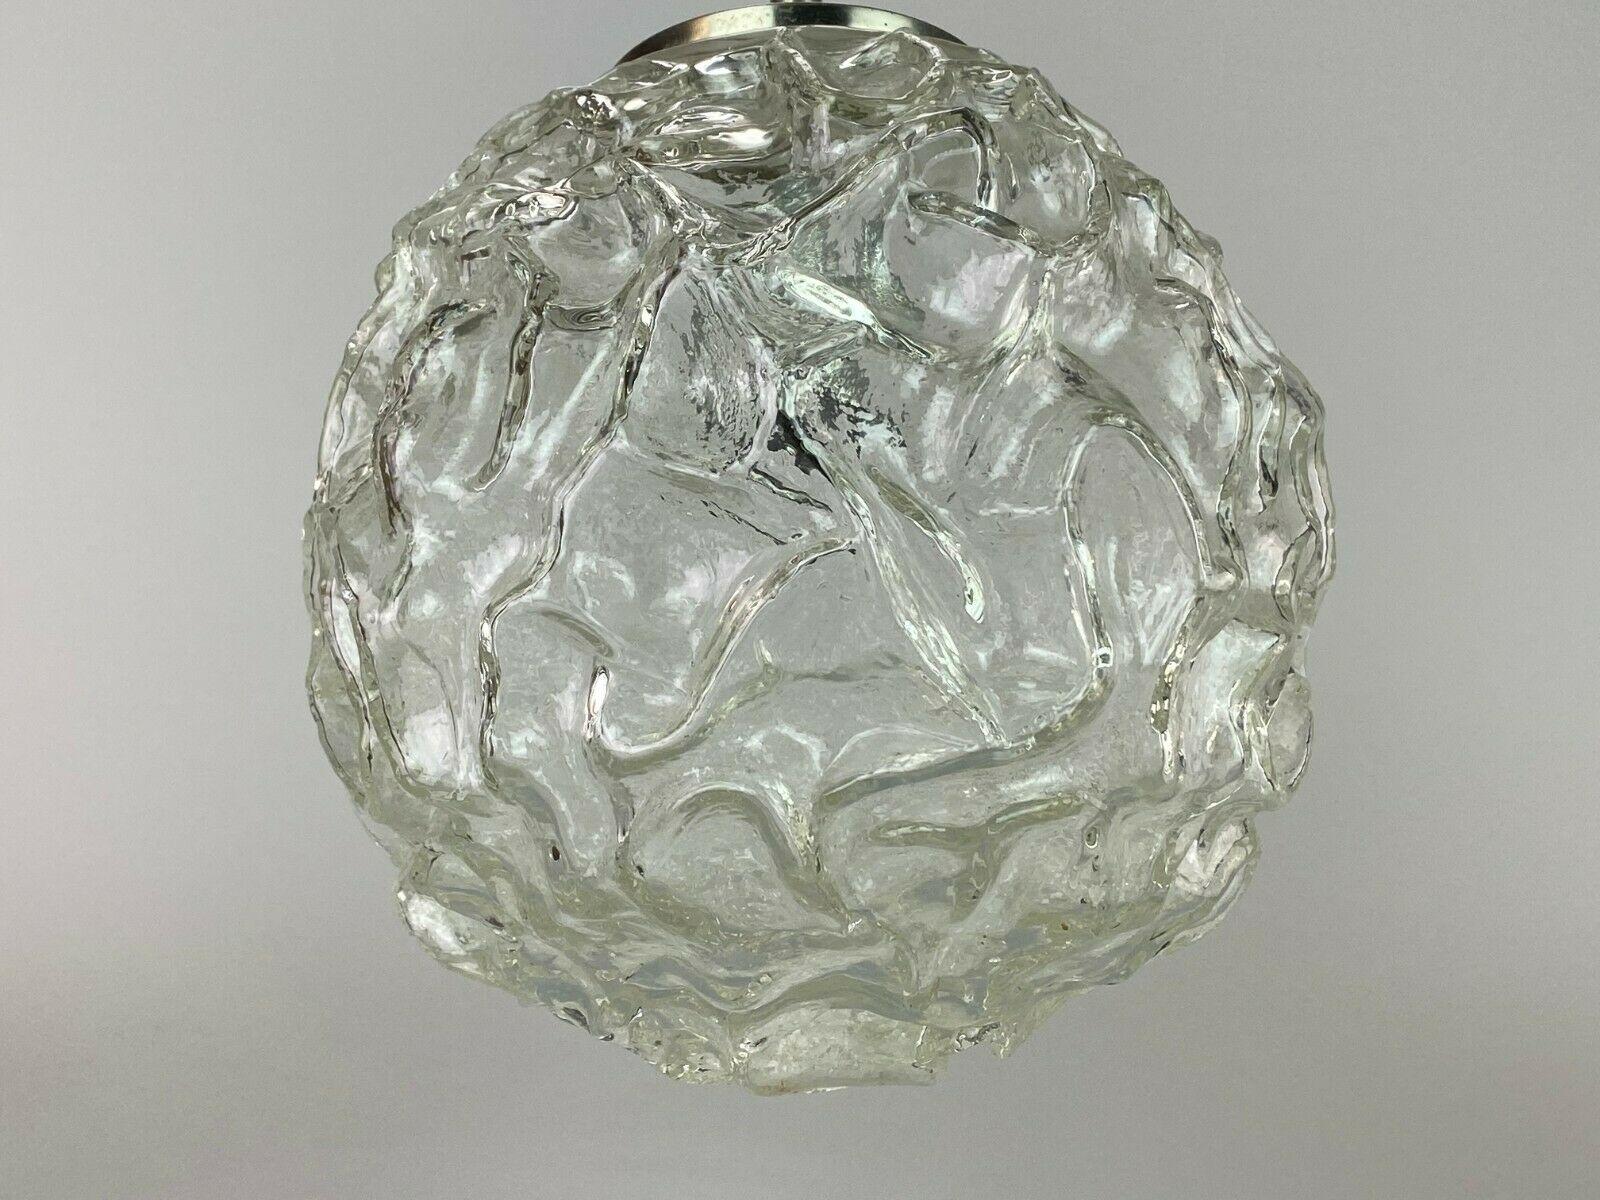 Metal 60s 70s Lamp Light Ceiling Lamp Hanging Lamp Hillebrand Glass Space Age Design For Sale